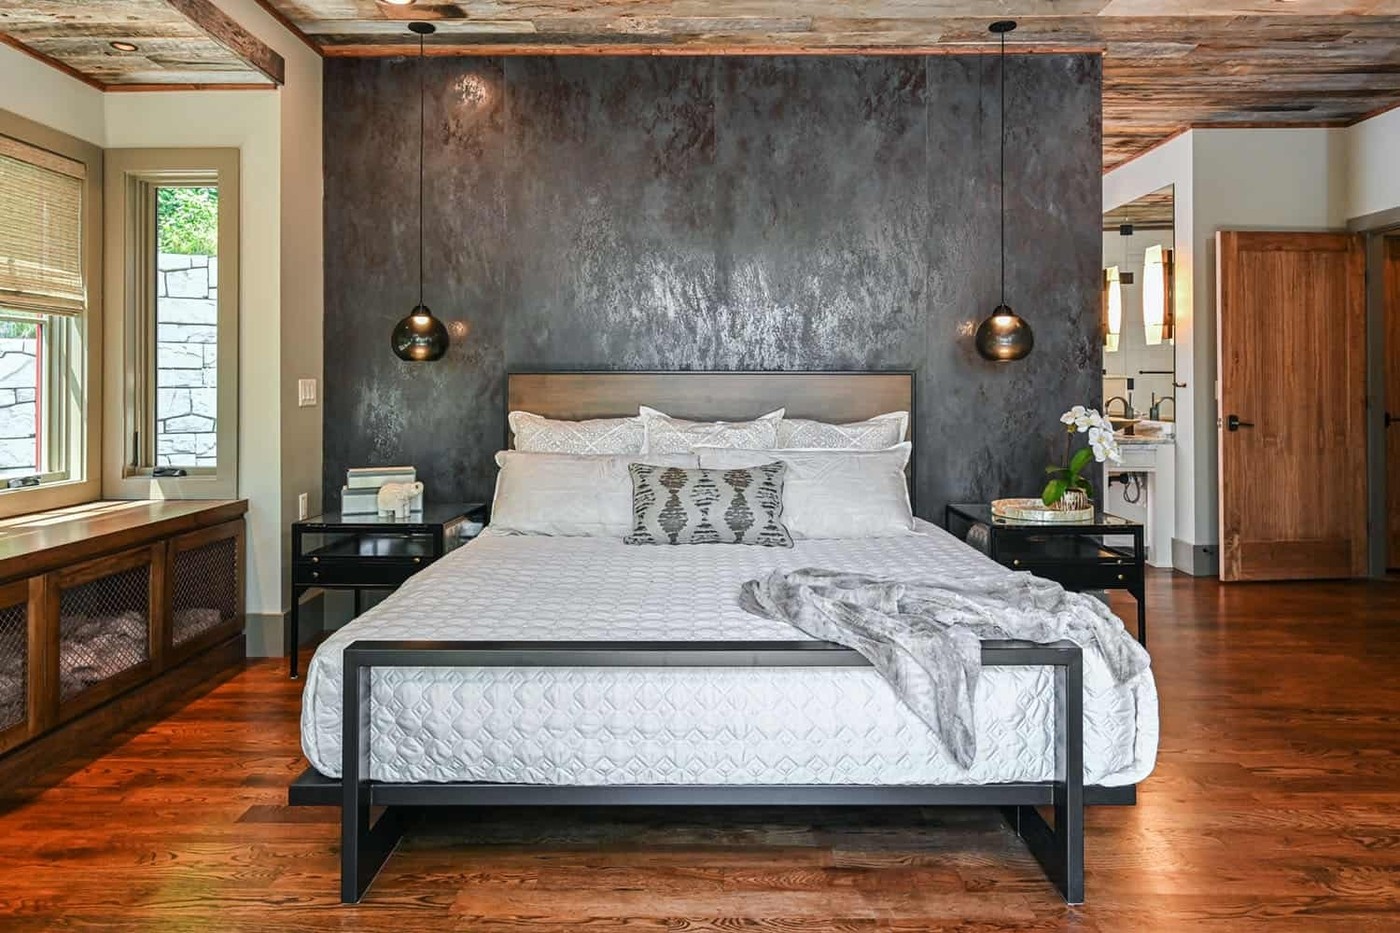 30 Guest Bedroom Ideas That’ll Make You Everyone’s Fave Host - Foter